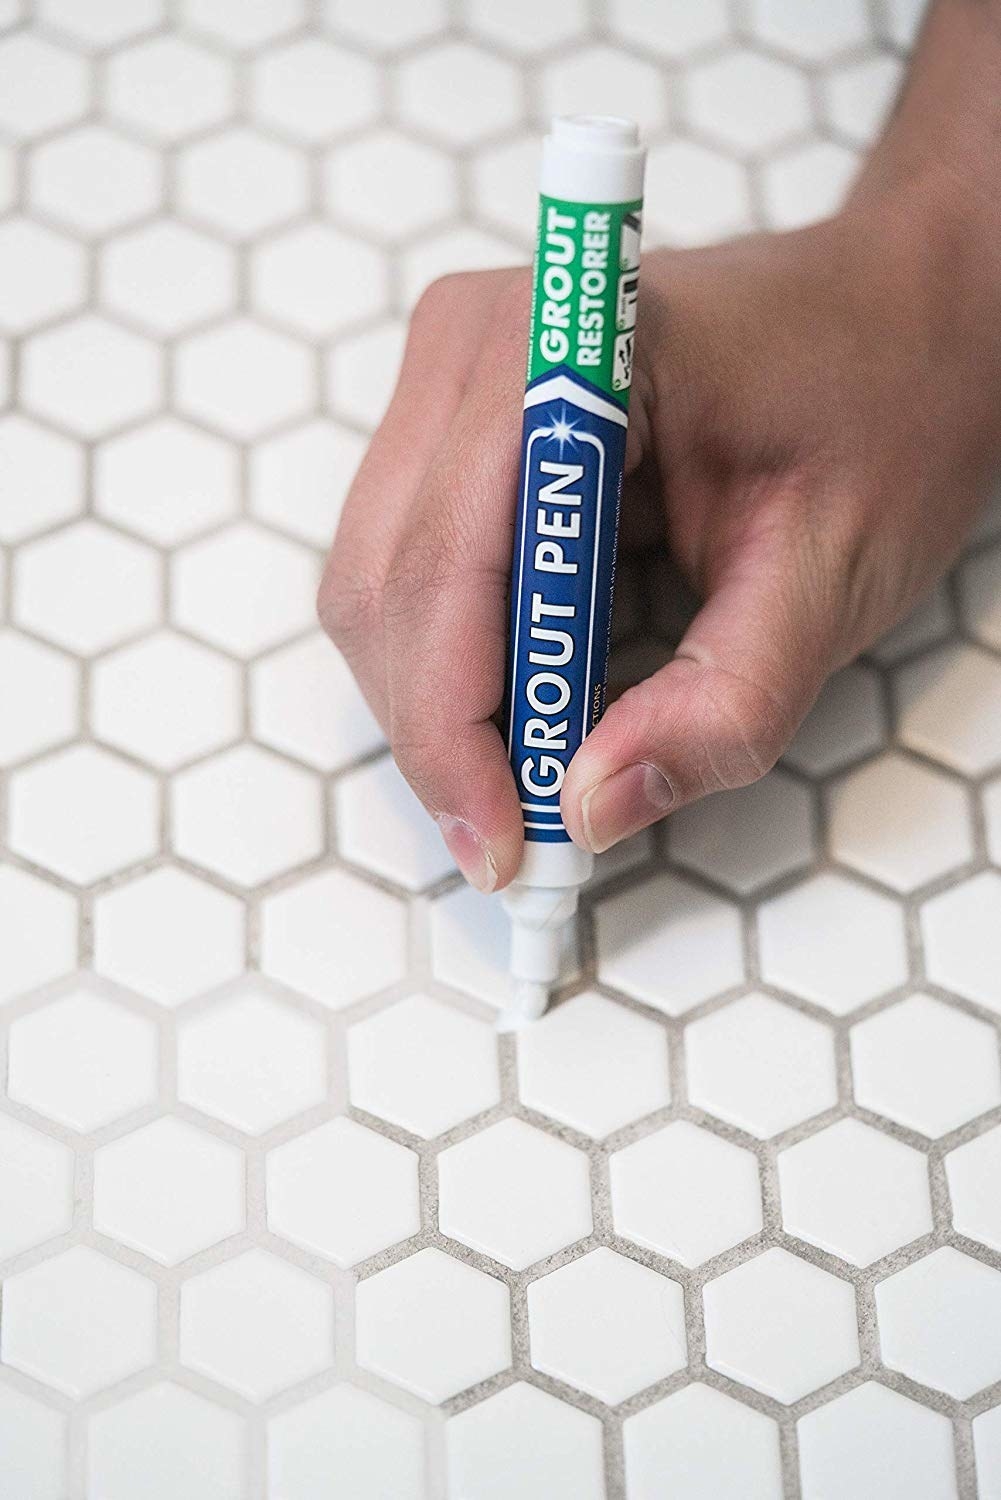 Grout pen in hand filling in dark tiles with white, matching cover